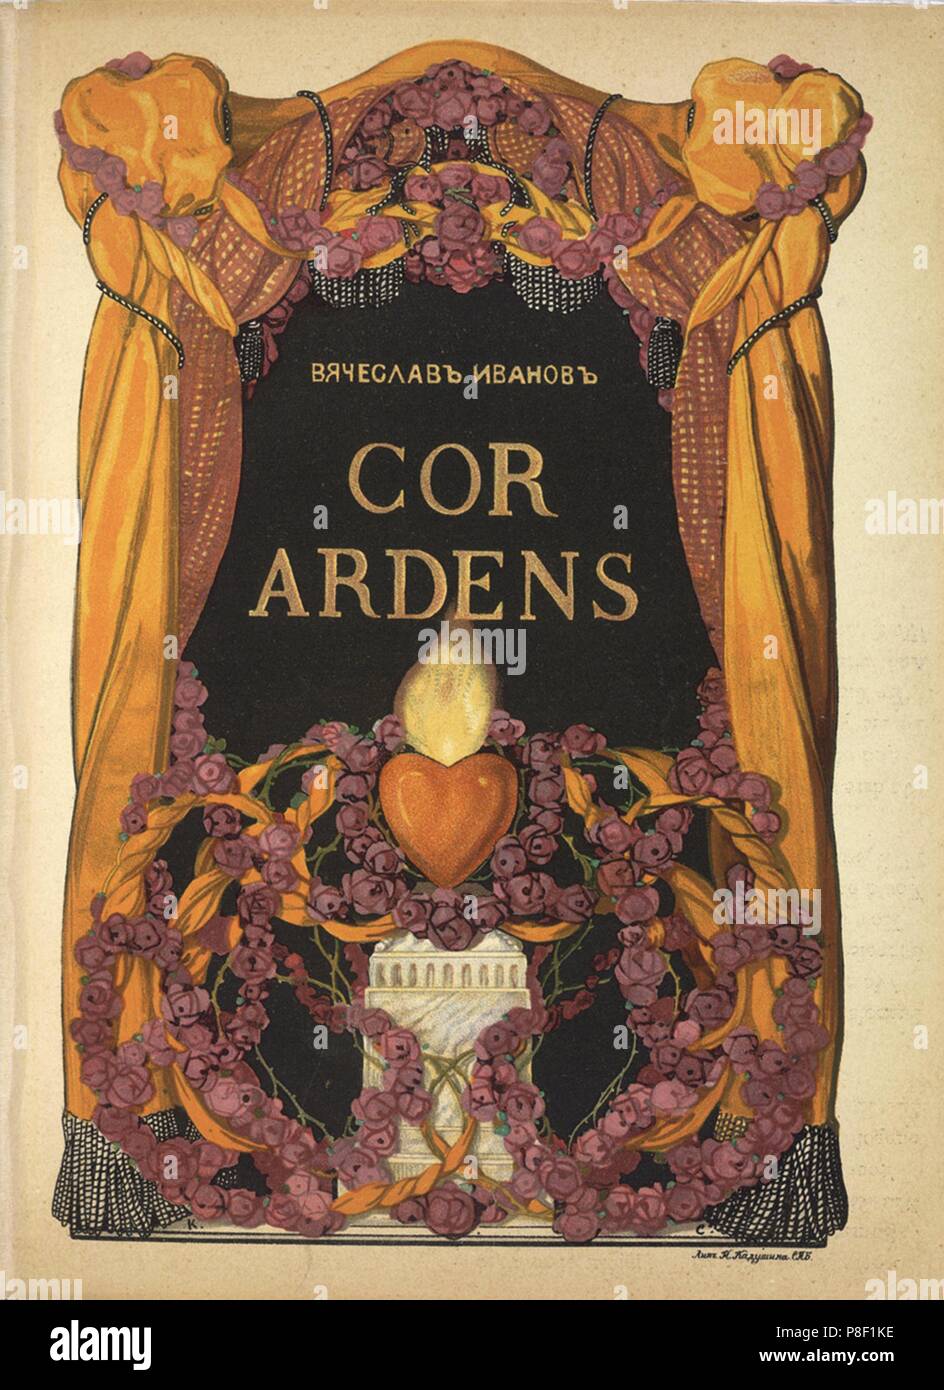 Frontispiece for the book of poems 'Cor Ardens' by Vyacheslav Ivanov. Museum: State Tretyakov Gallery, Moscow. Stock Photo